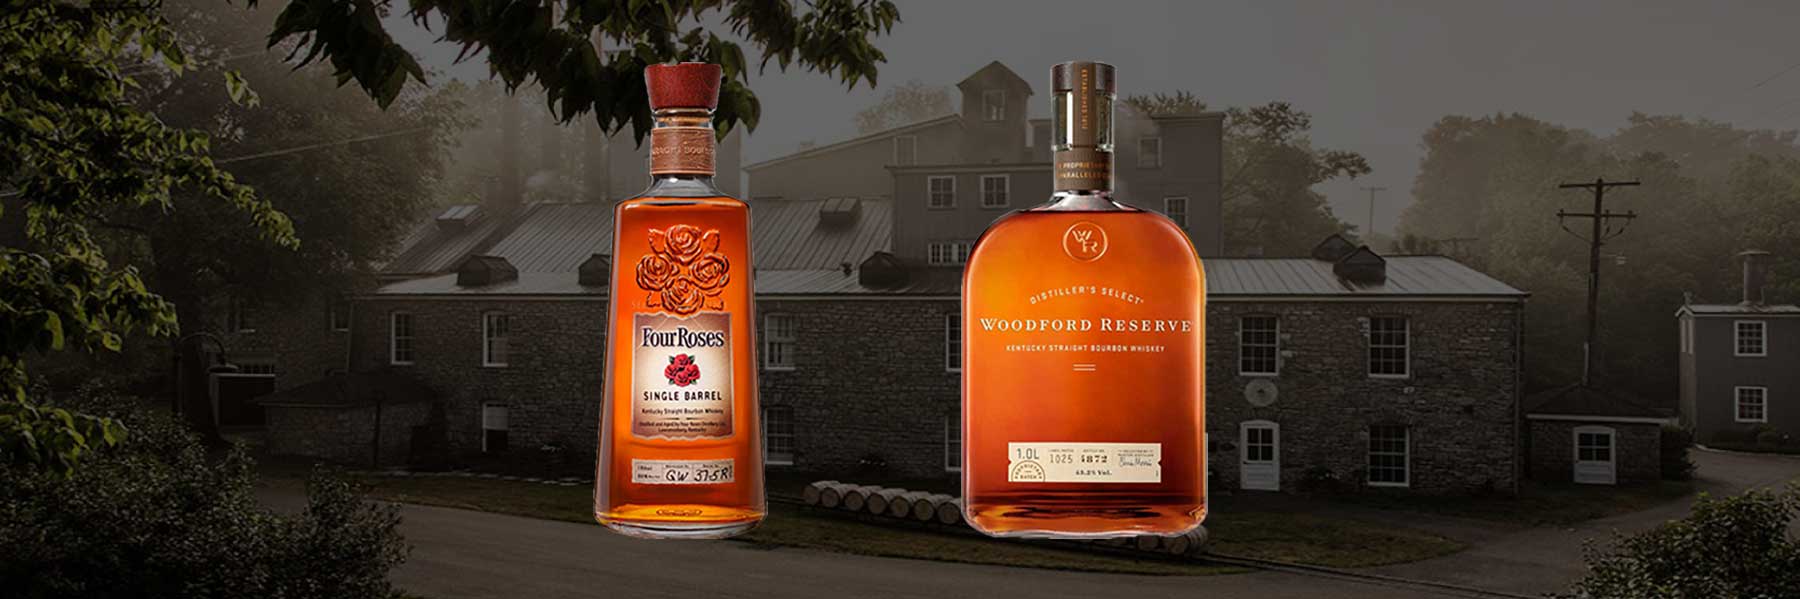 Four Roses vs Woodford Reserve | Compare these 2 brilliant bourbons